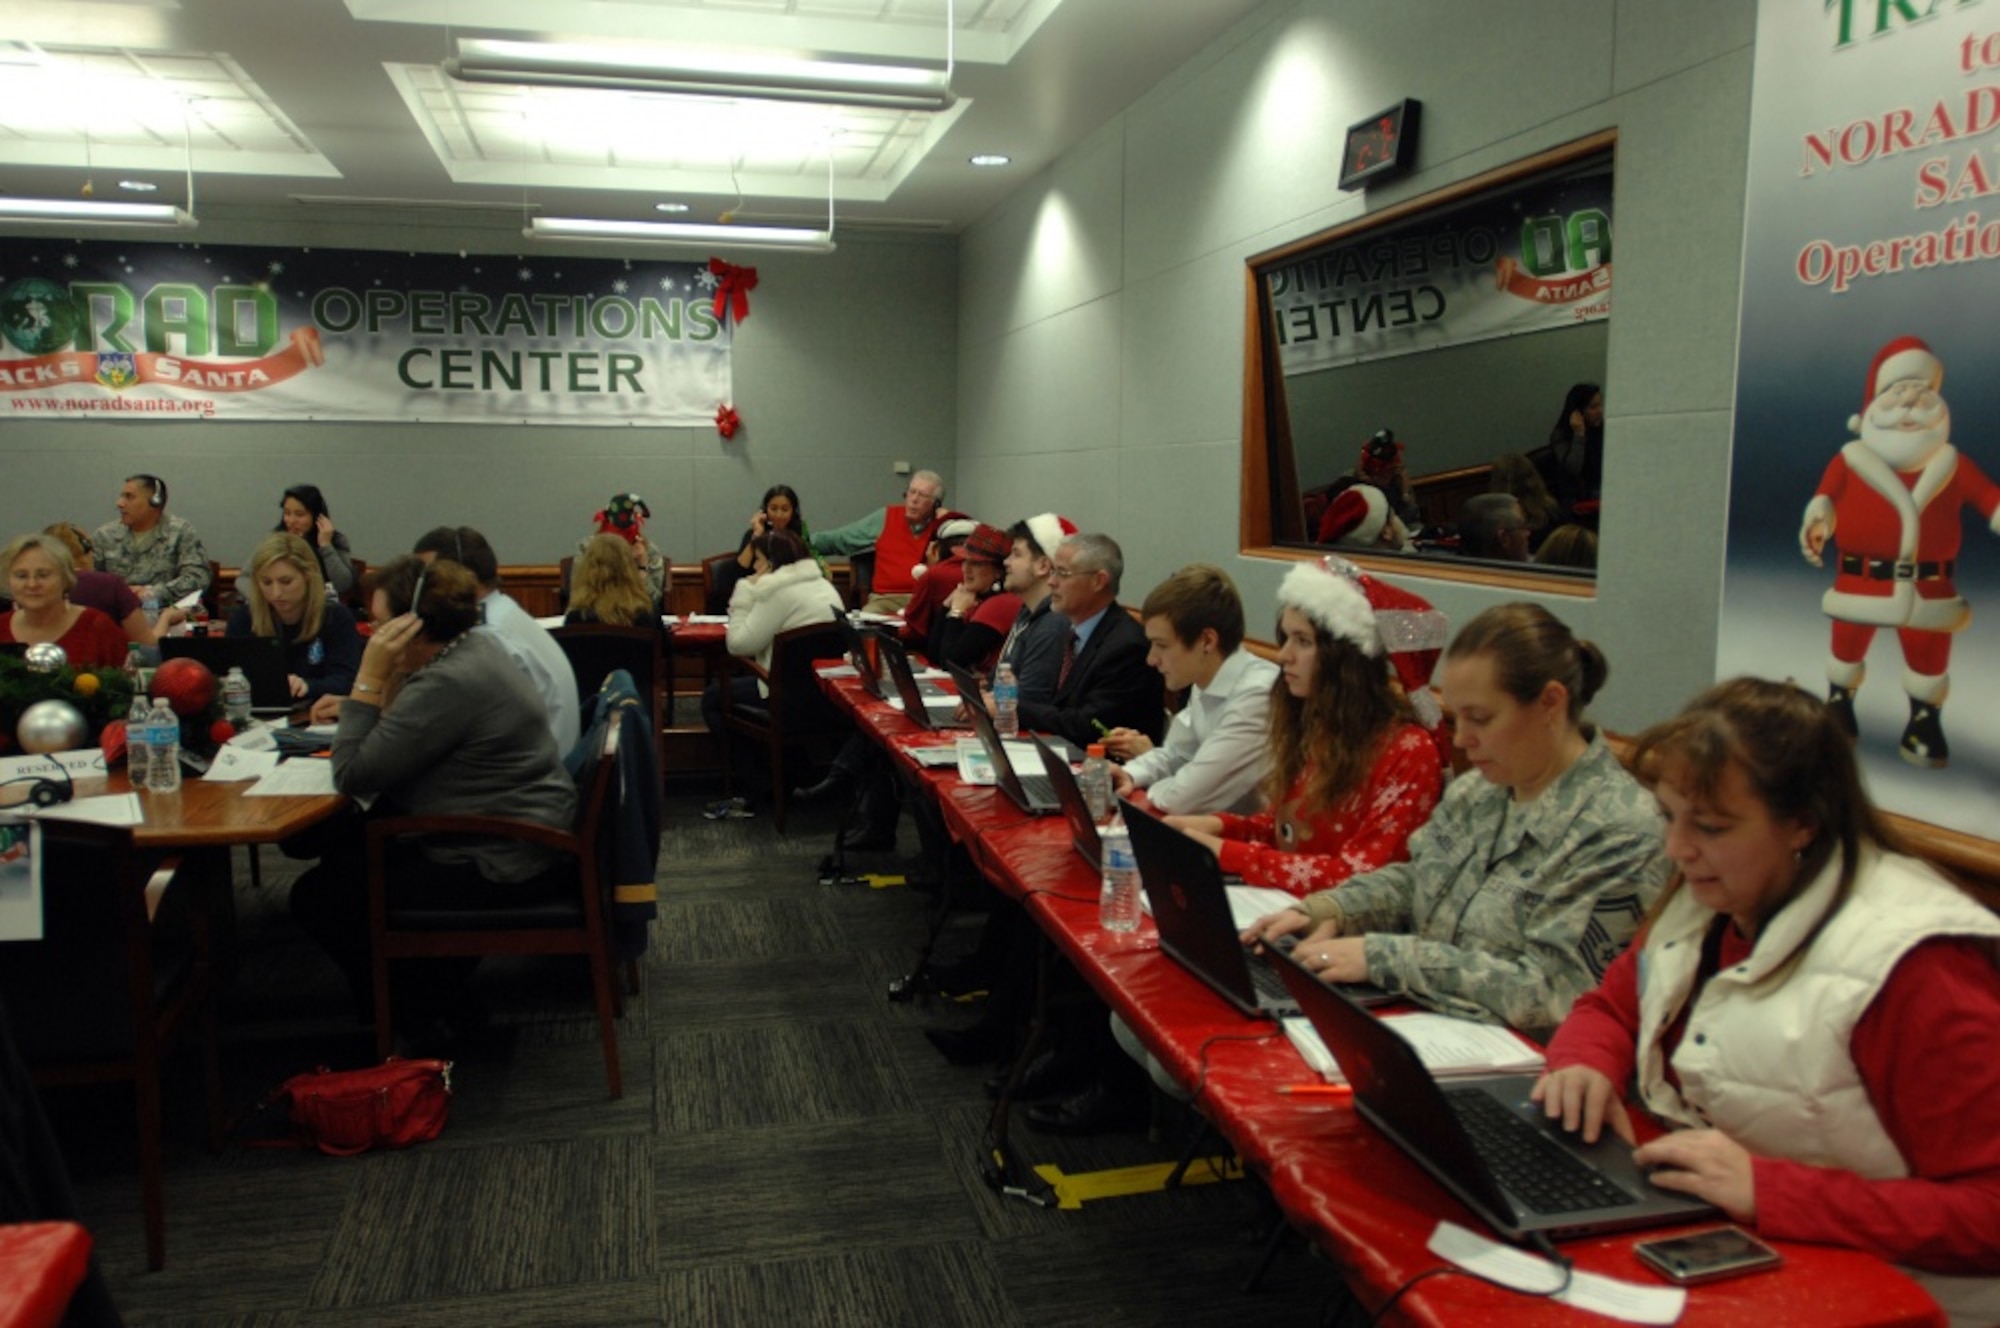 The North American Aerospace Defense Command, or NORAD, at Peterson Air Force Base, Colo., tracks Santa’s yuletide journey.